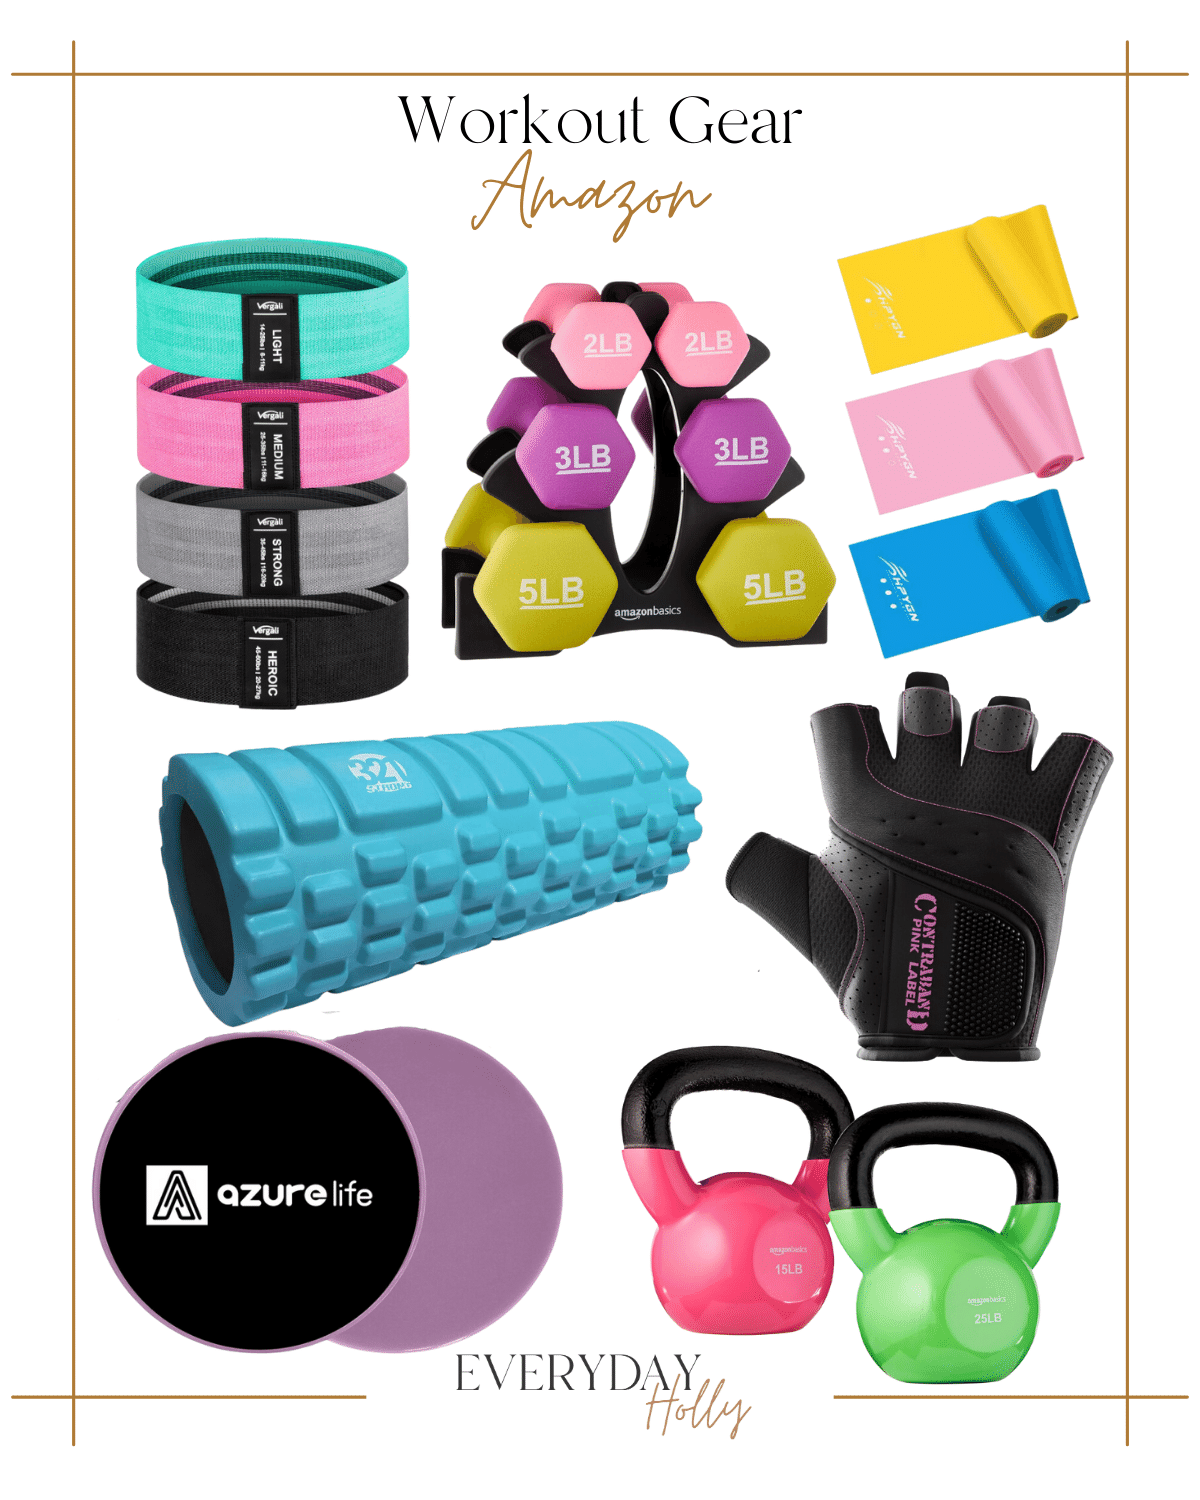 trendy and comfy athleisure styles that you need | #trendy #comfy #athleisure #workout #gear #resistancebands #weightglove #dummbell #kettlebell #sliders #exercise #fitness